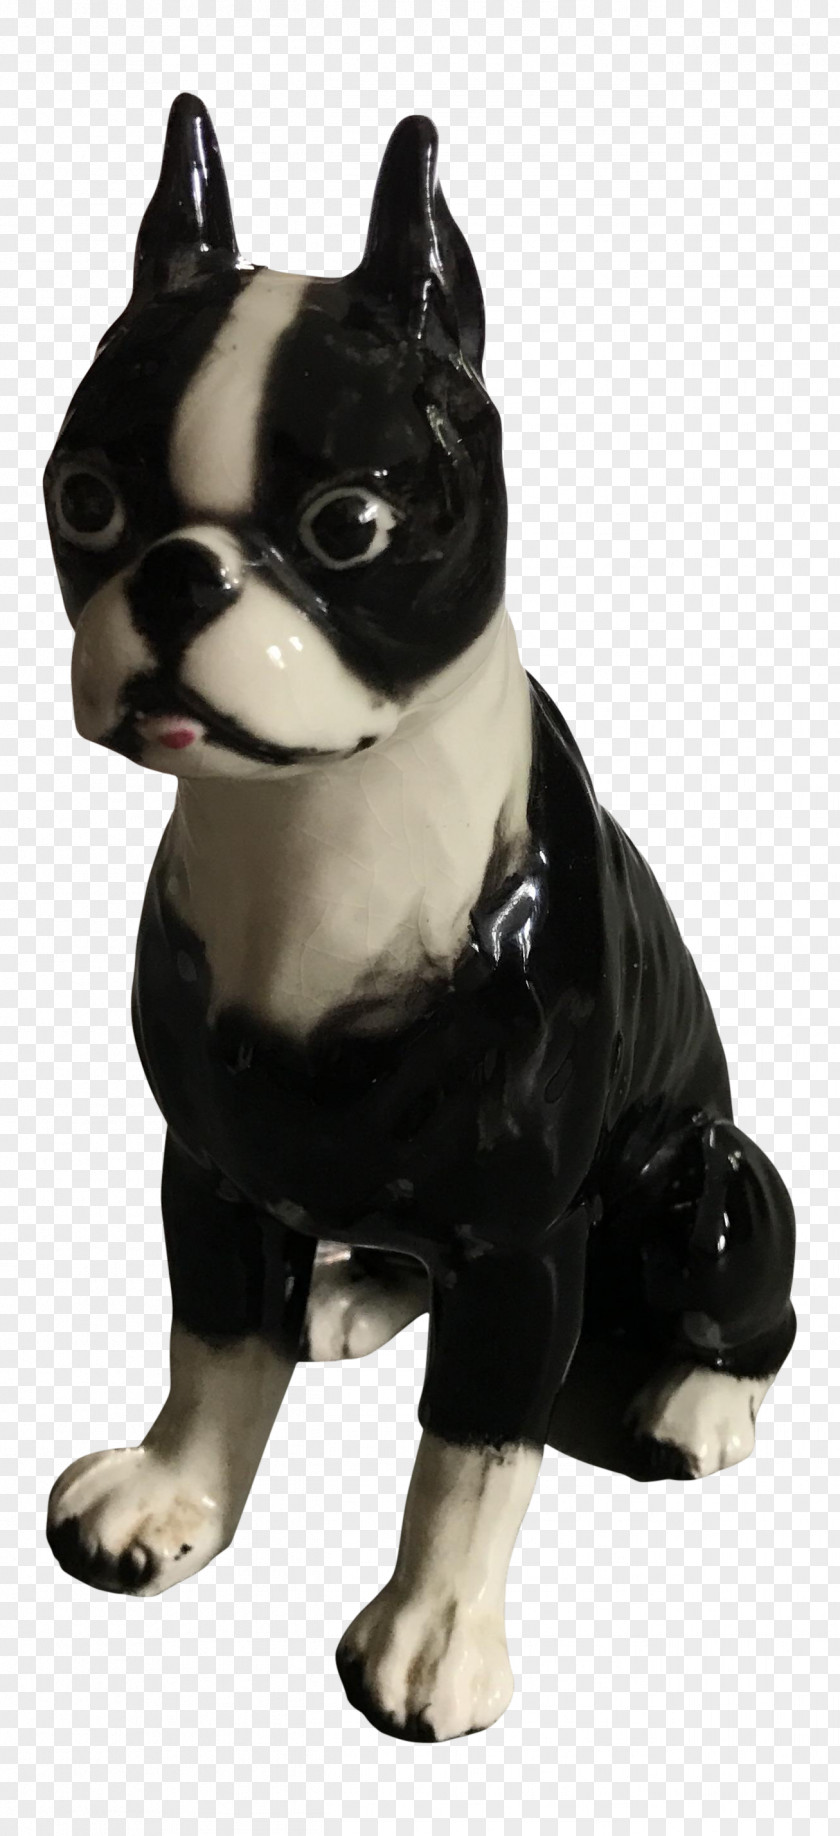 Black French Bulldog Boston Terrier Dog Breed Companion Non-sporting Group PNG